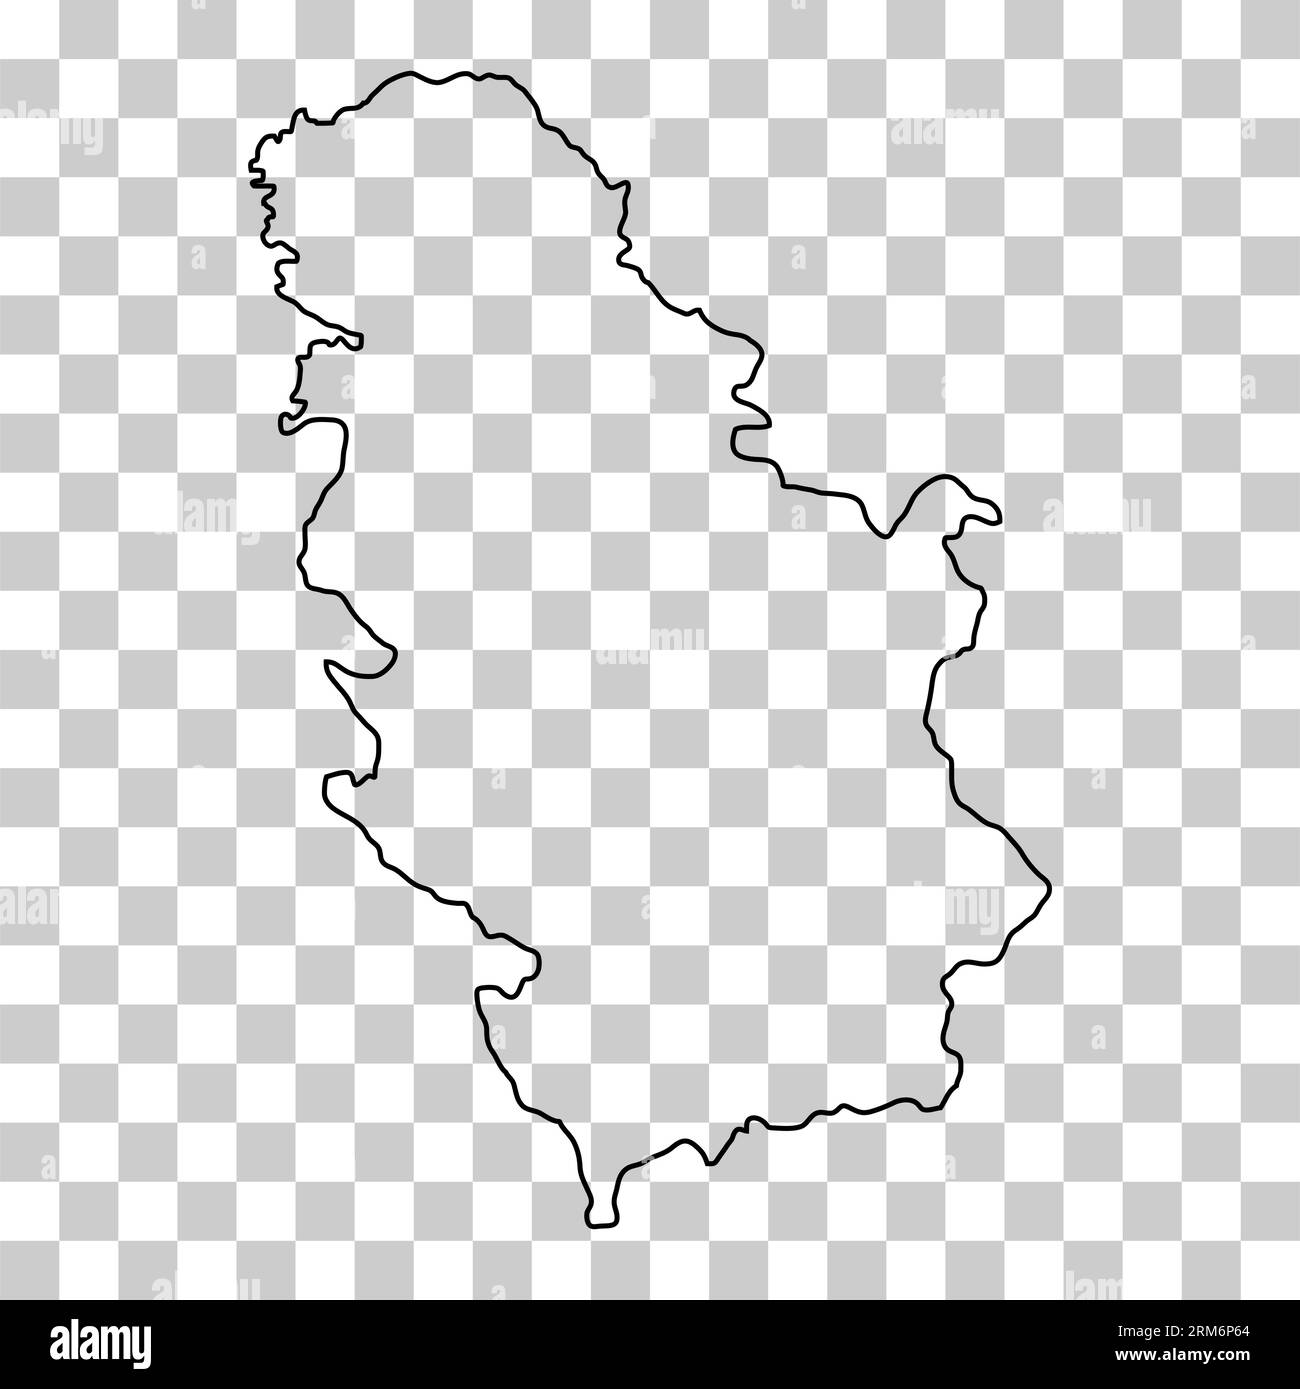 Serbia map icon, geography blank concept, isolated graphic background vector illustration . Stock Vector